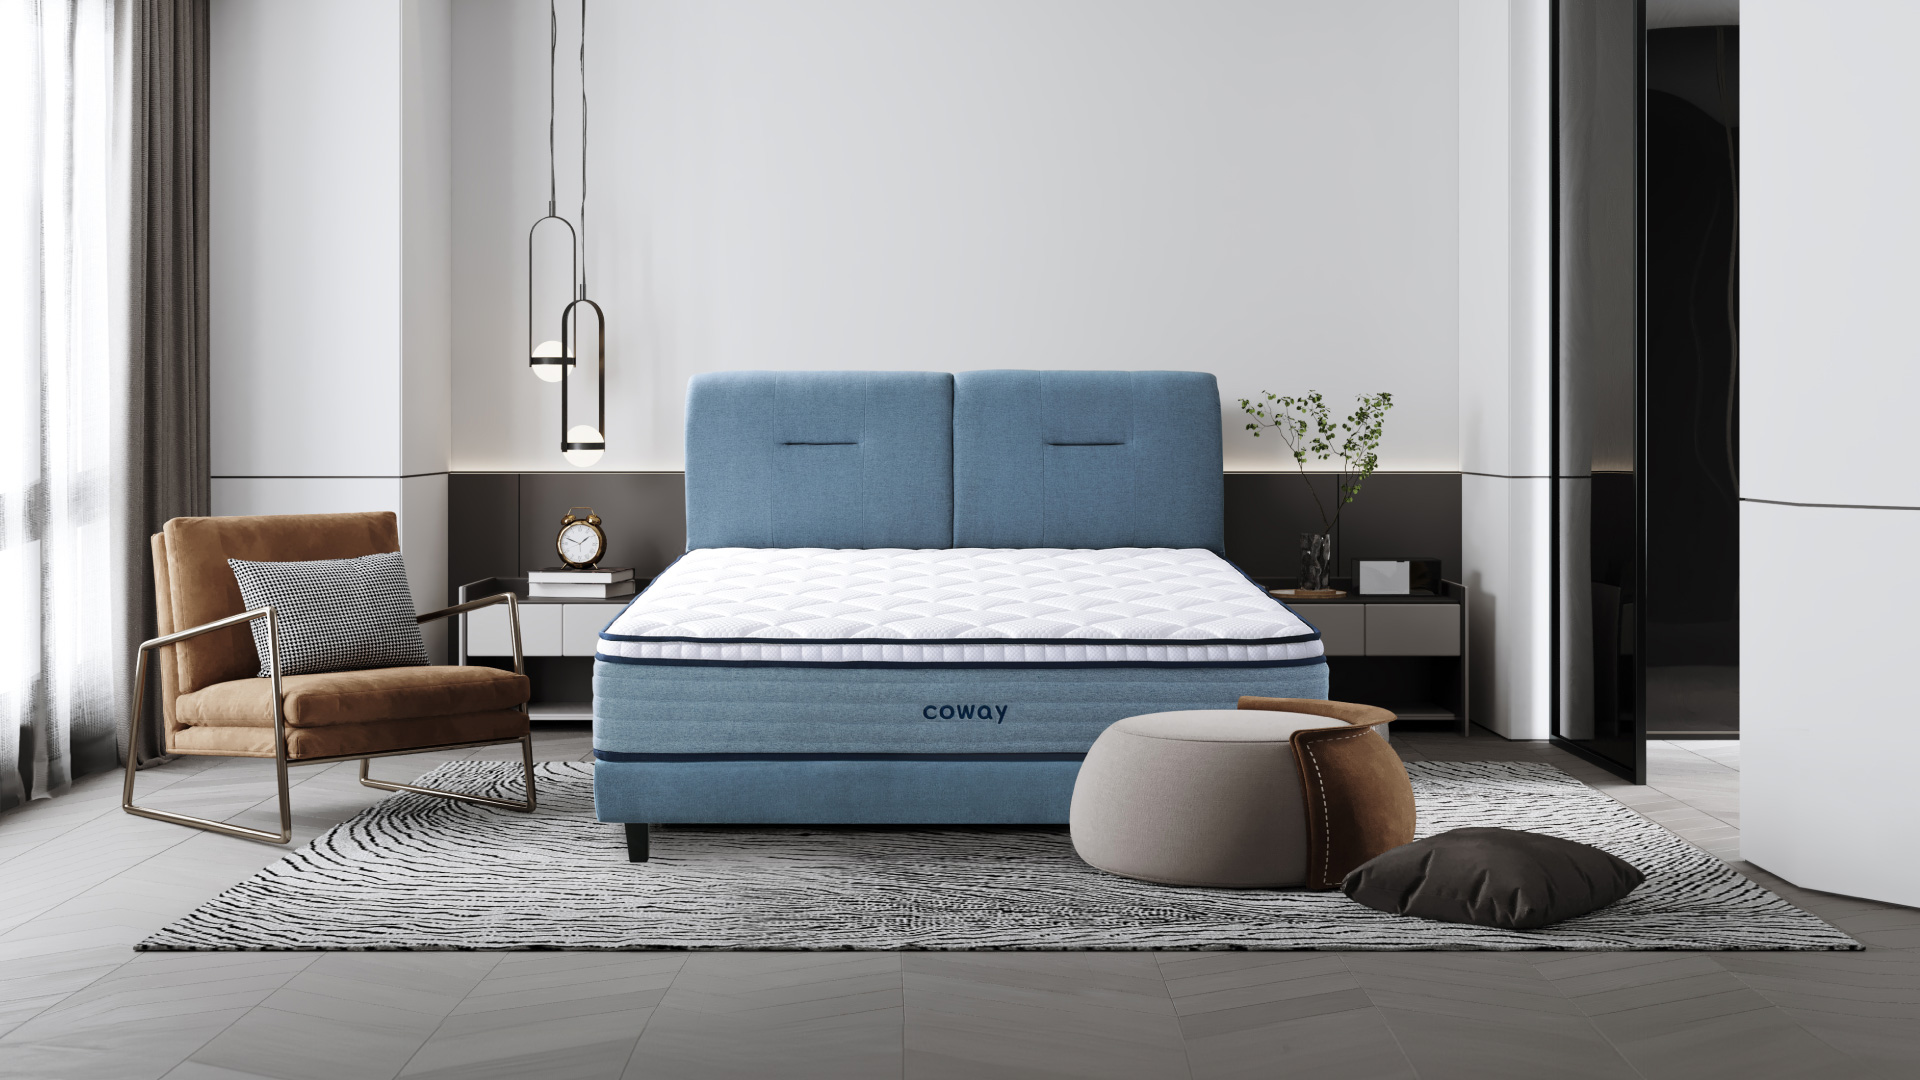 coway-prime-lite-series-mattress-at-the-center-of-the-room-with-an-armchair-and-a-footrest-with-a-pillow-on-the-floor